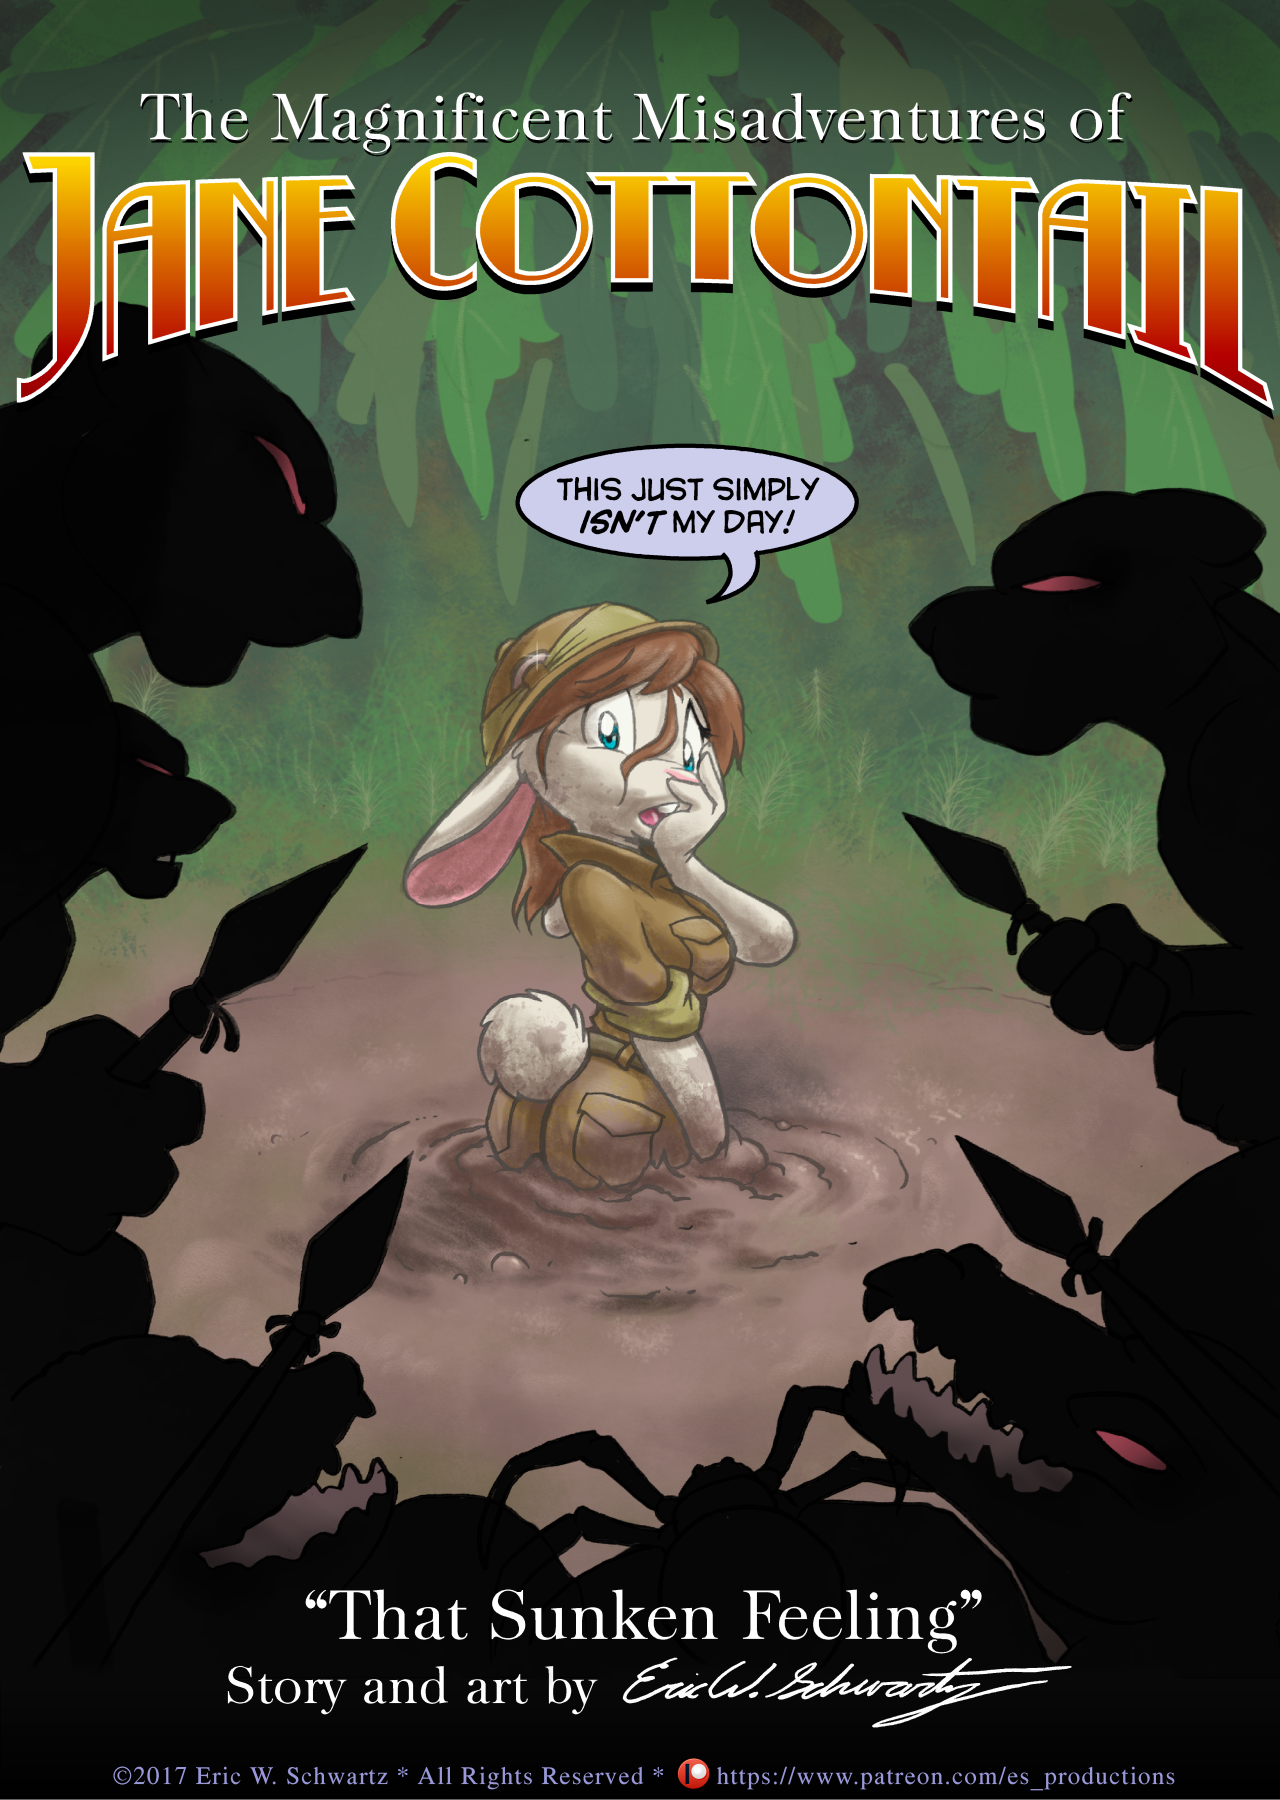 The Misadventures of Jane Cottontail